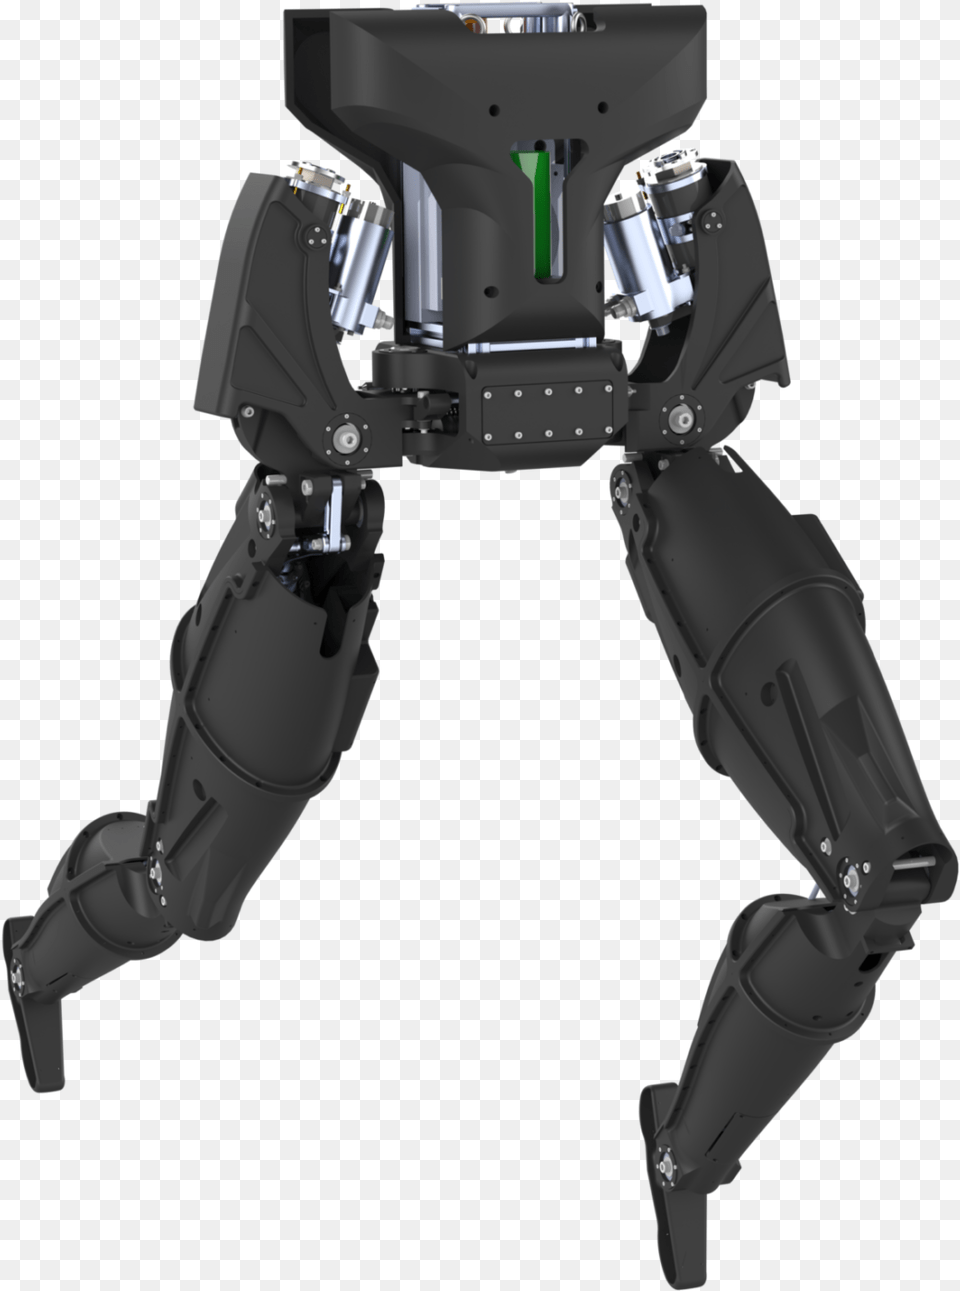 Draco 2000, Robot, Device, Power Drill, Tool Png